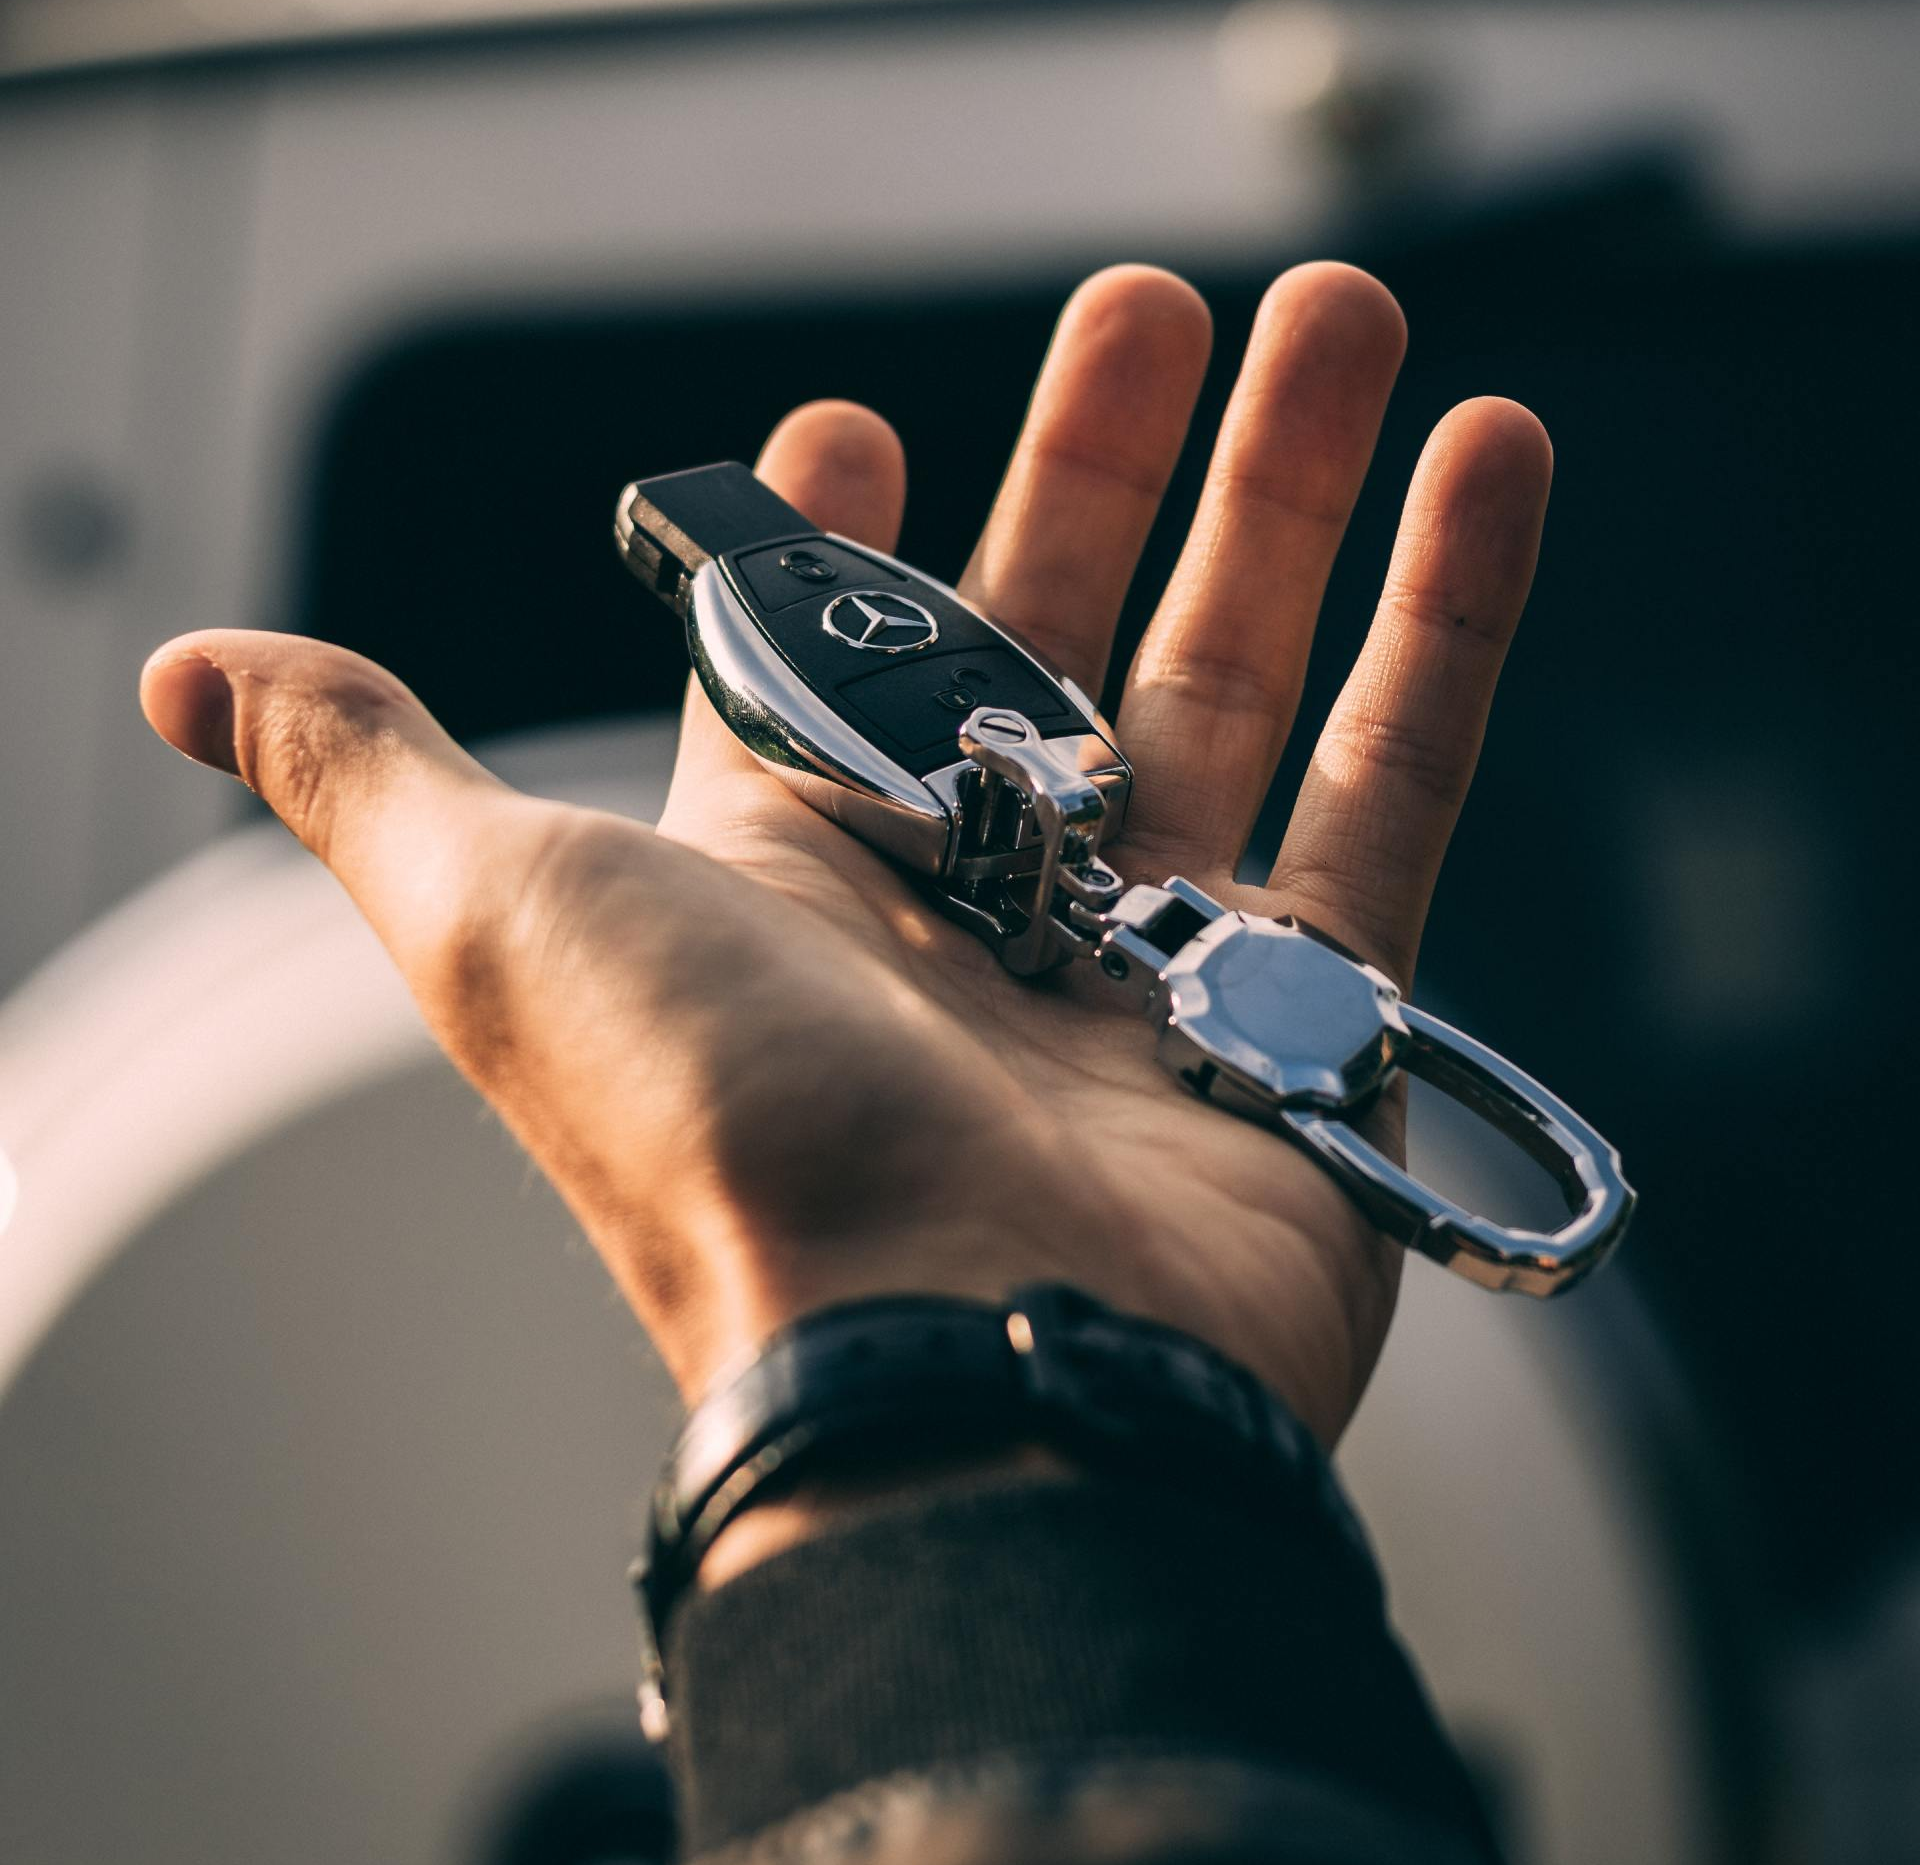 A replacement smart car key